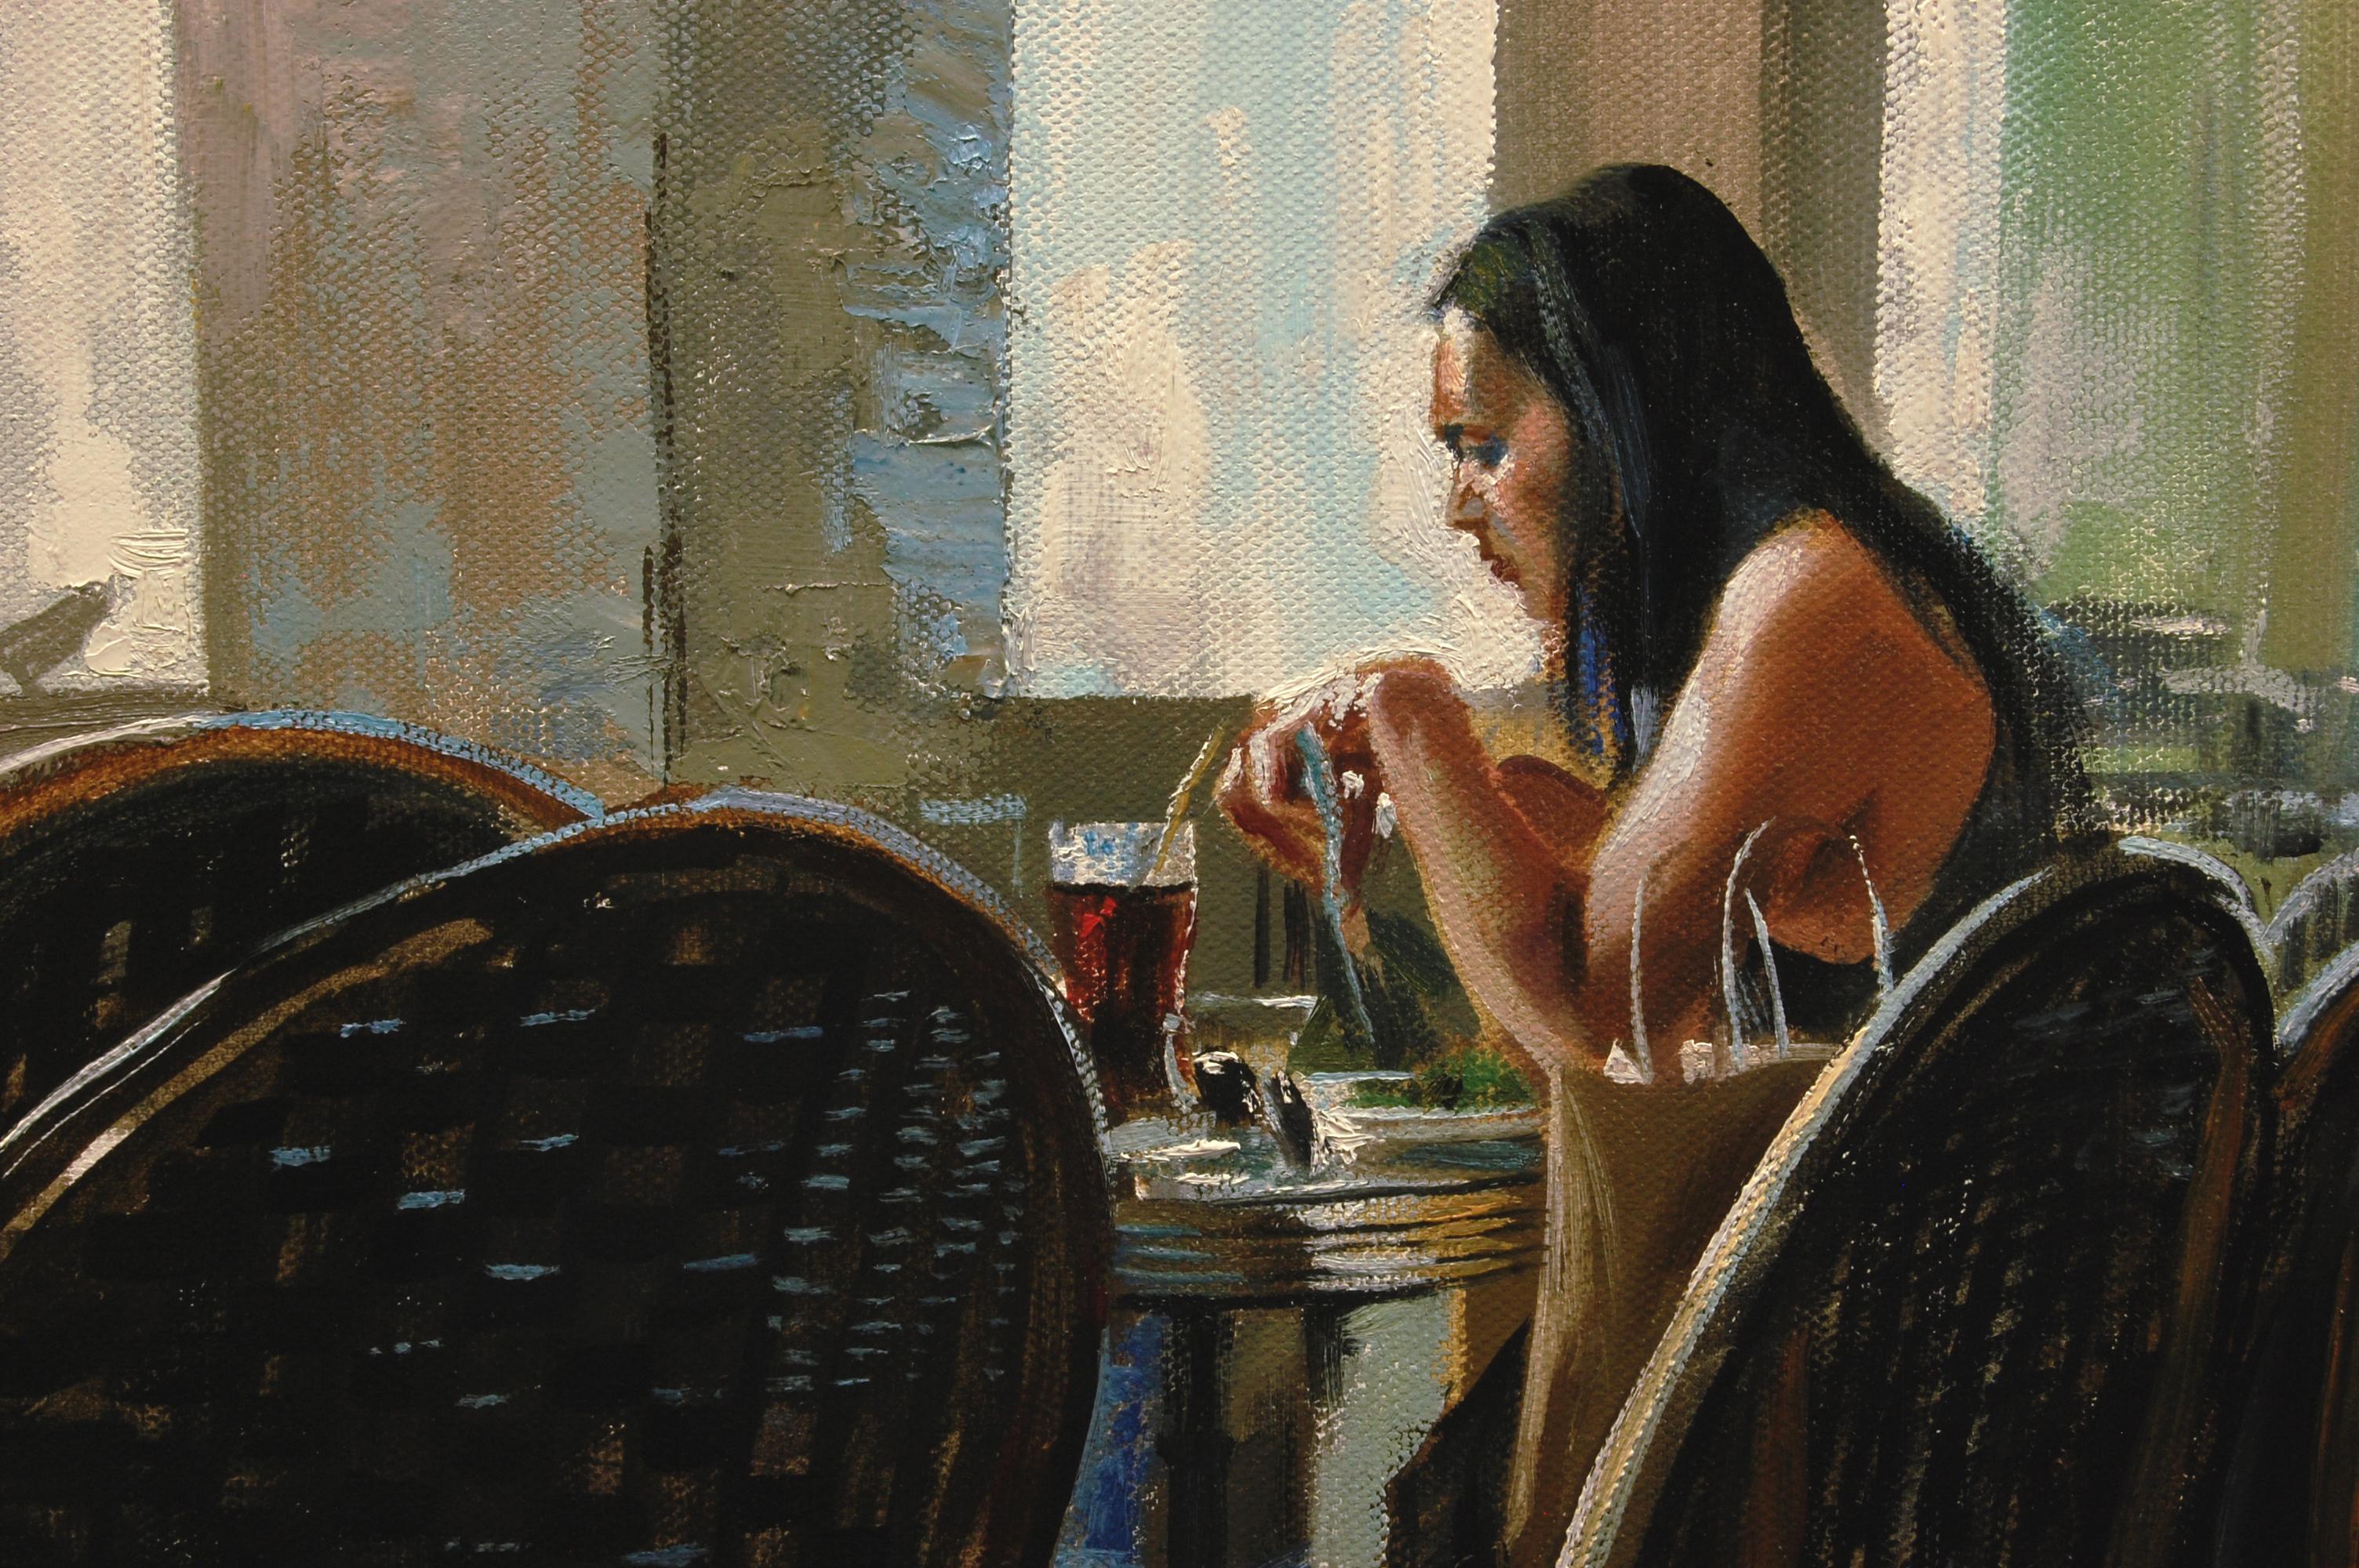 <p>Artist Comments<br />In this painting, artist Onelio Marrero endeavored to convey the atmosphere of al fresco dining. Onelio often paints scenes of people in restaurant settings with a touch of the sitter's introspective solitude. The woman here